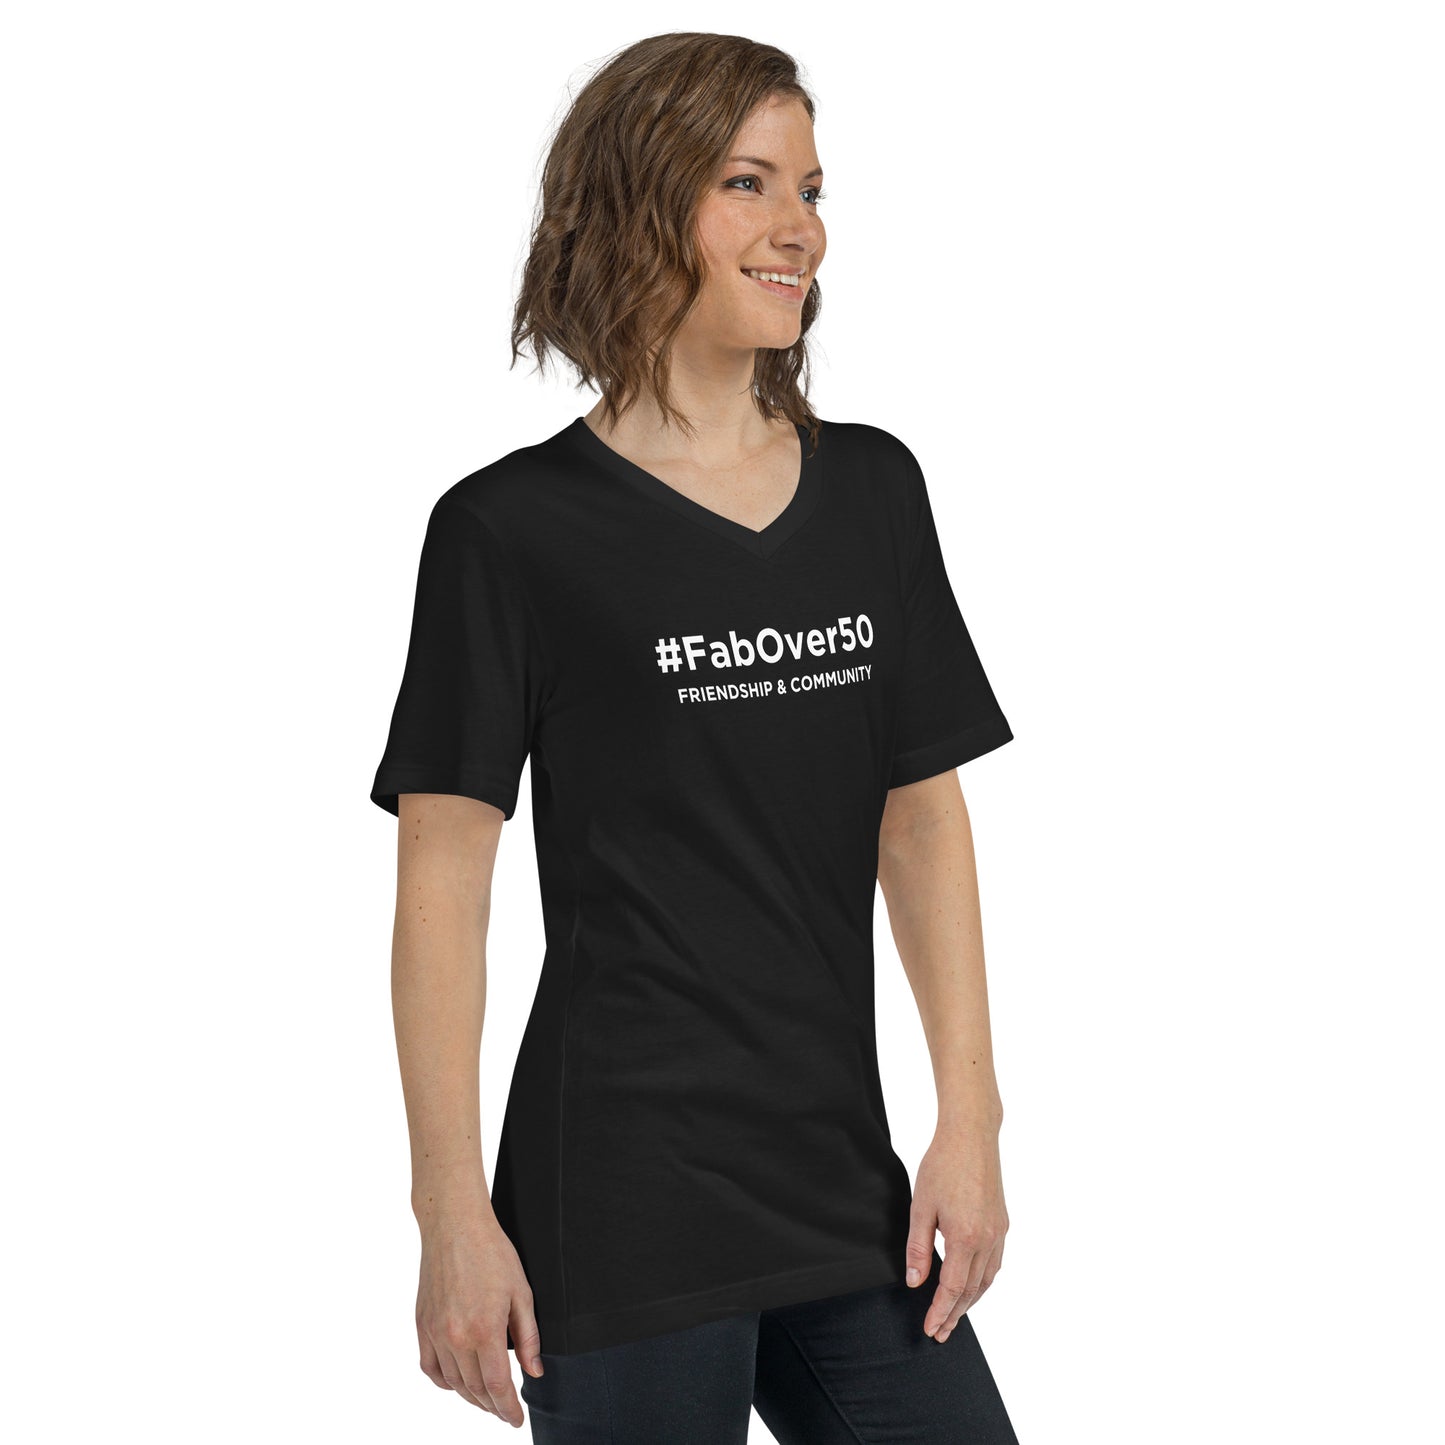 Unisex Short Sleeve V-Neck T-Shirt with White Writing with Leaderboard Name on Back